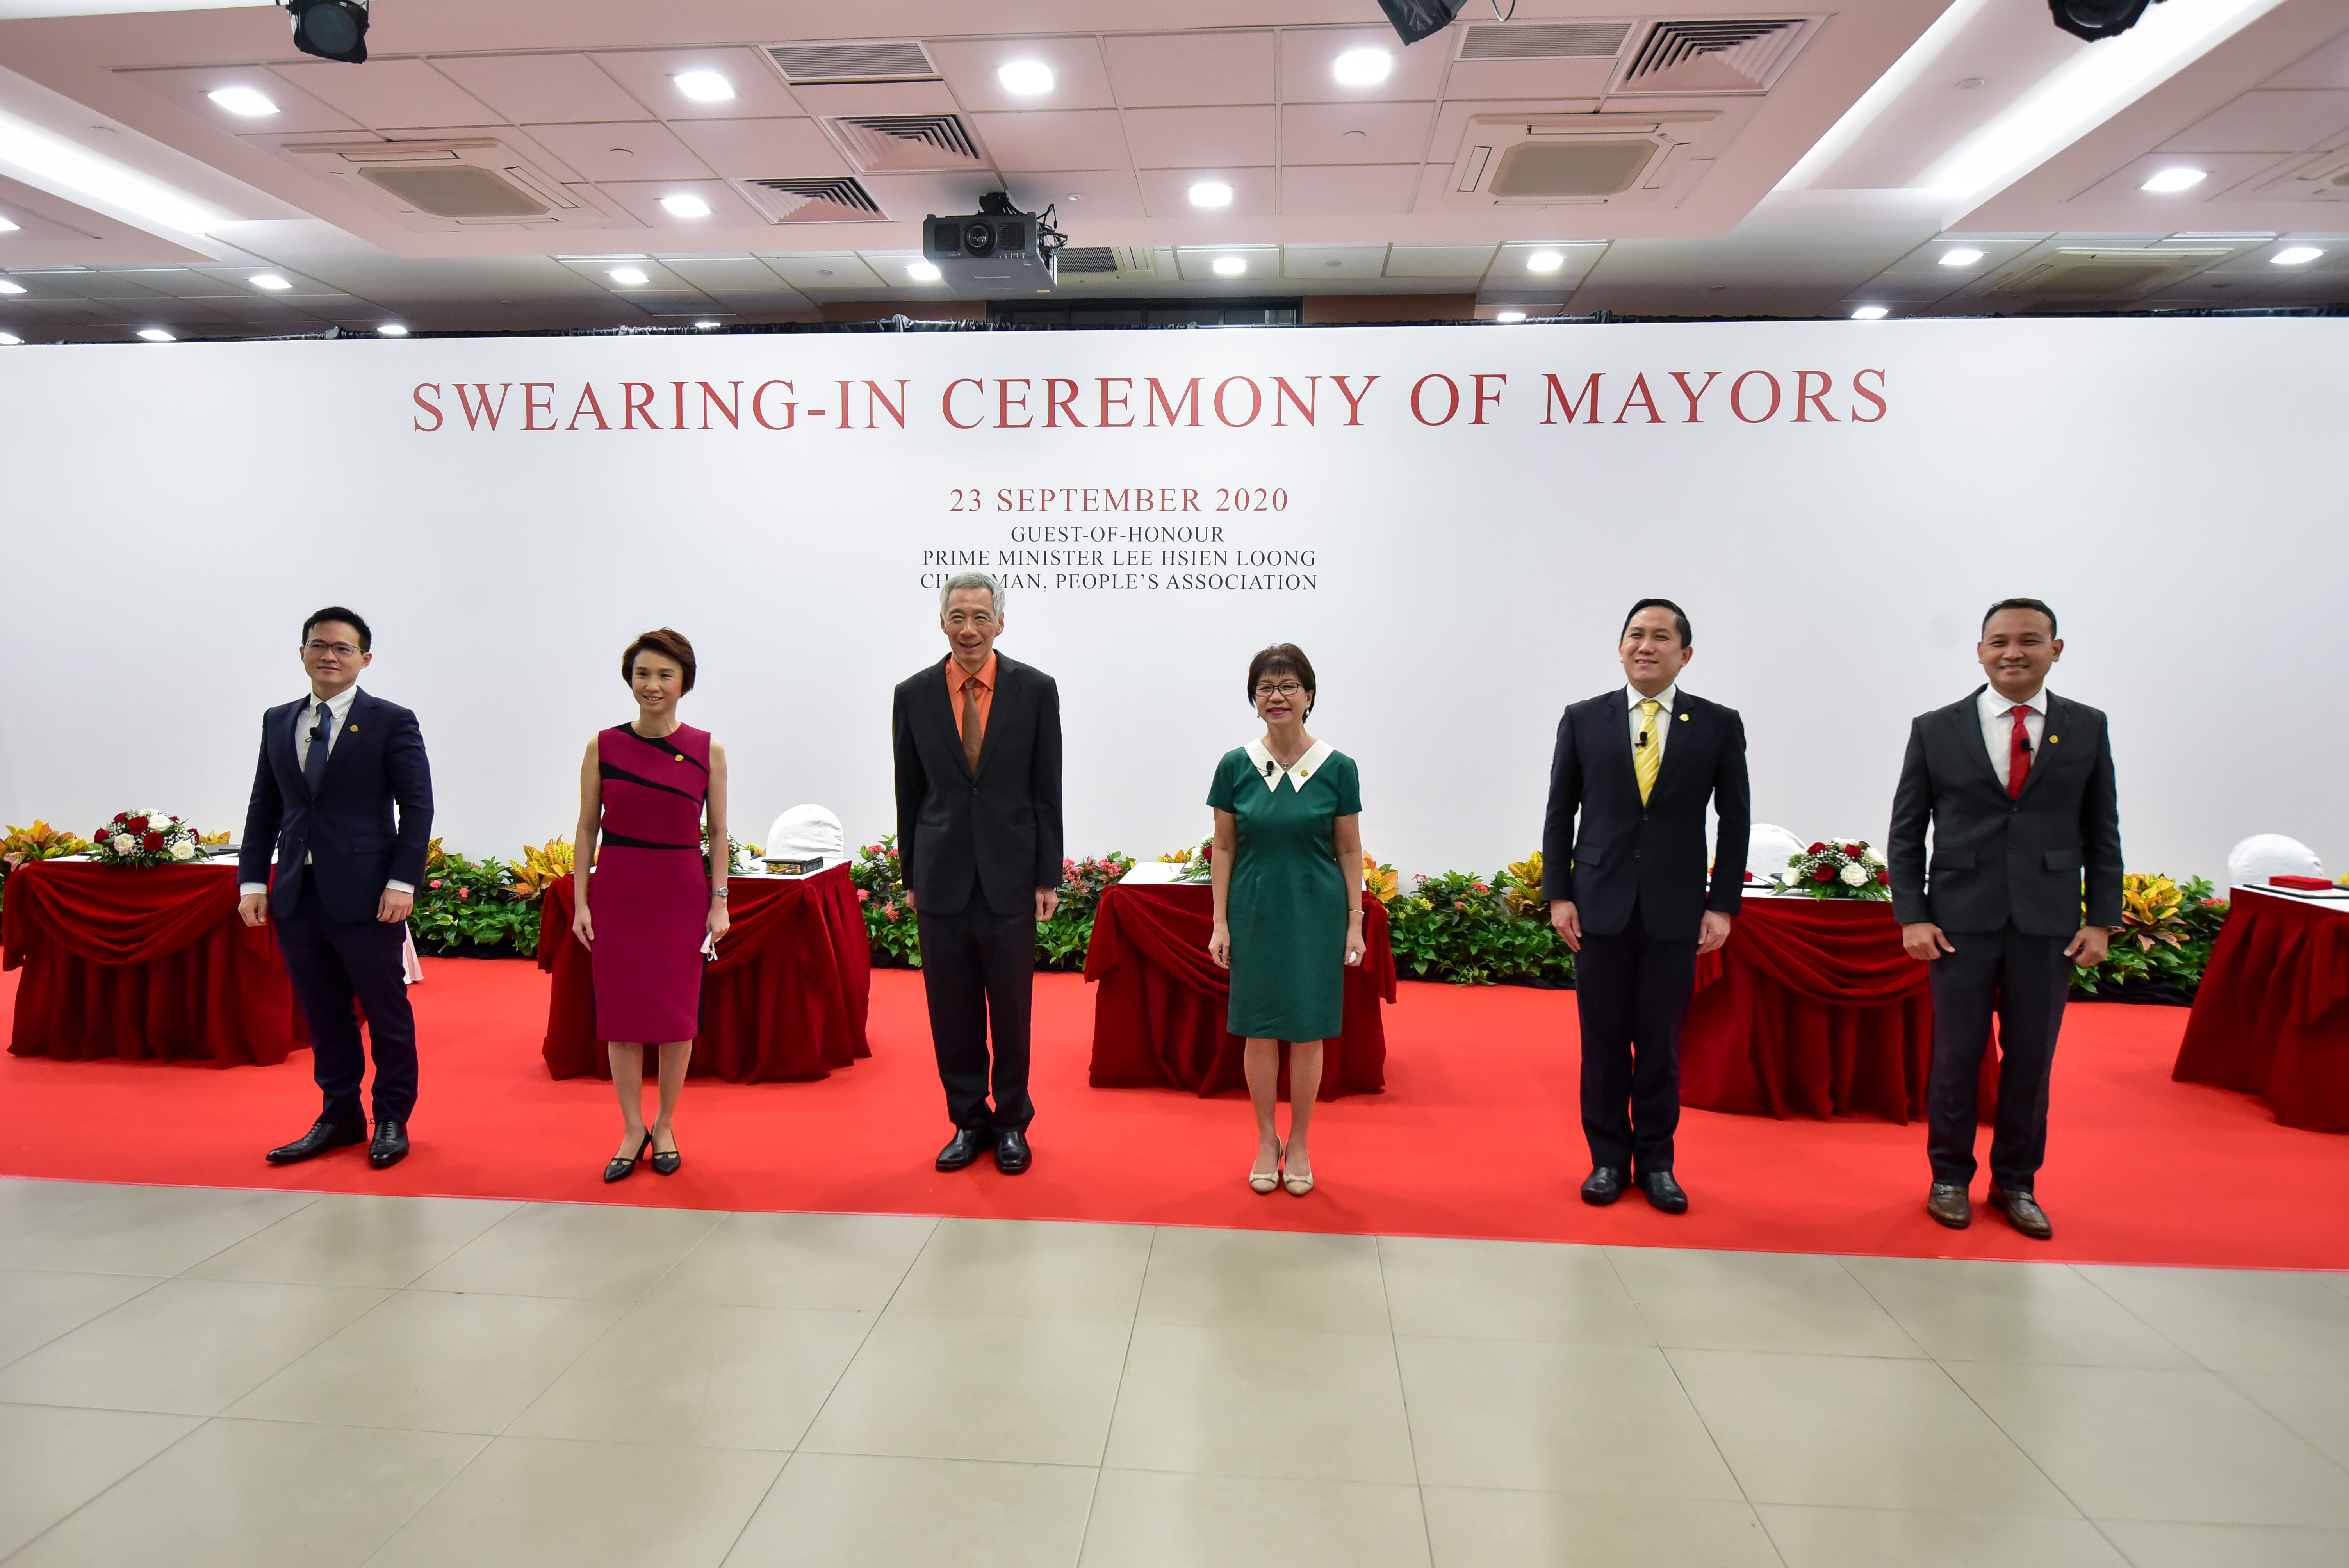 Swearing in ceremony of mayors 2020